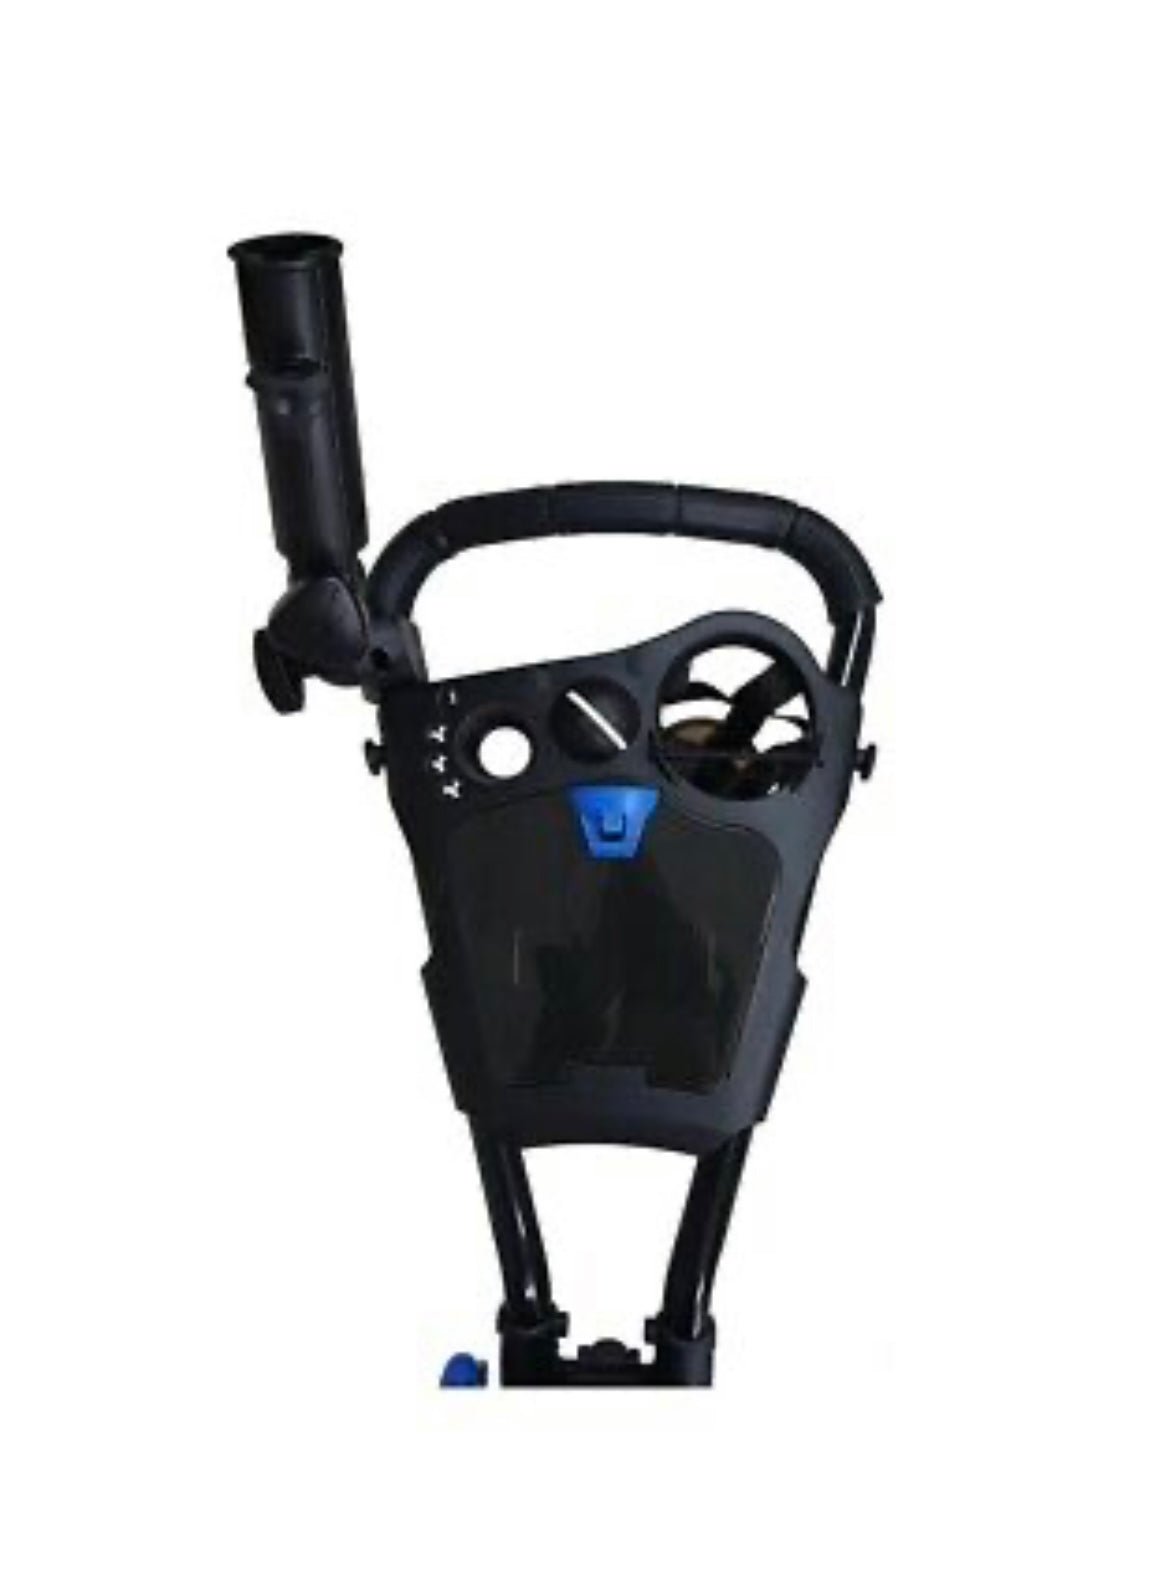 GOLF TROLLEY- £99.00 whiles stocks last - Golf Store UK